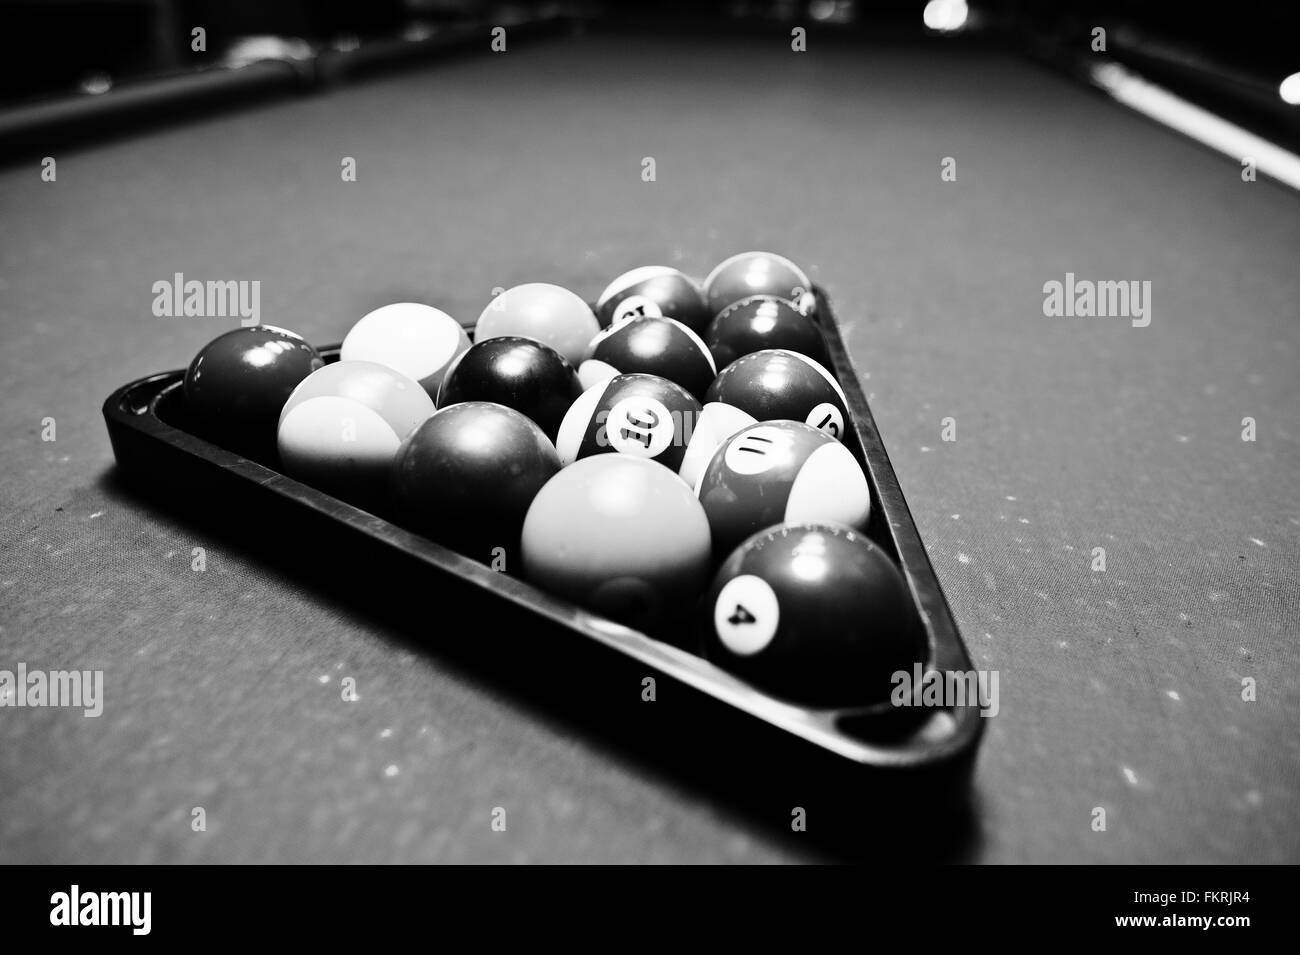 Billiard balls in a pool table at triangle Stock Photo